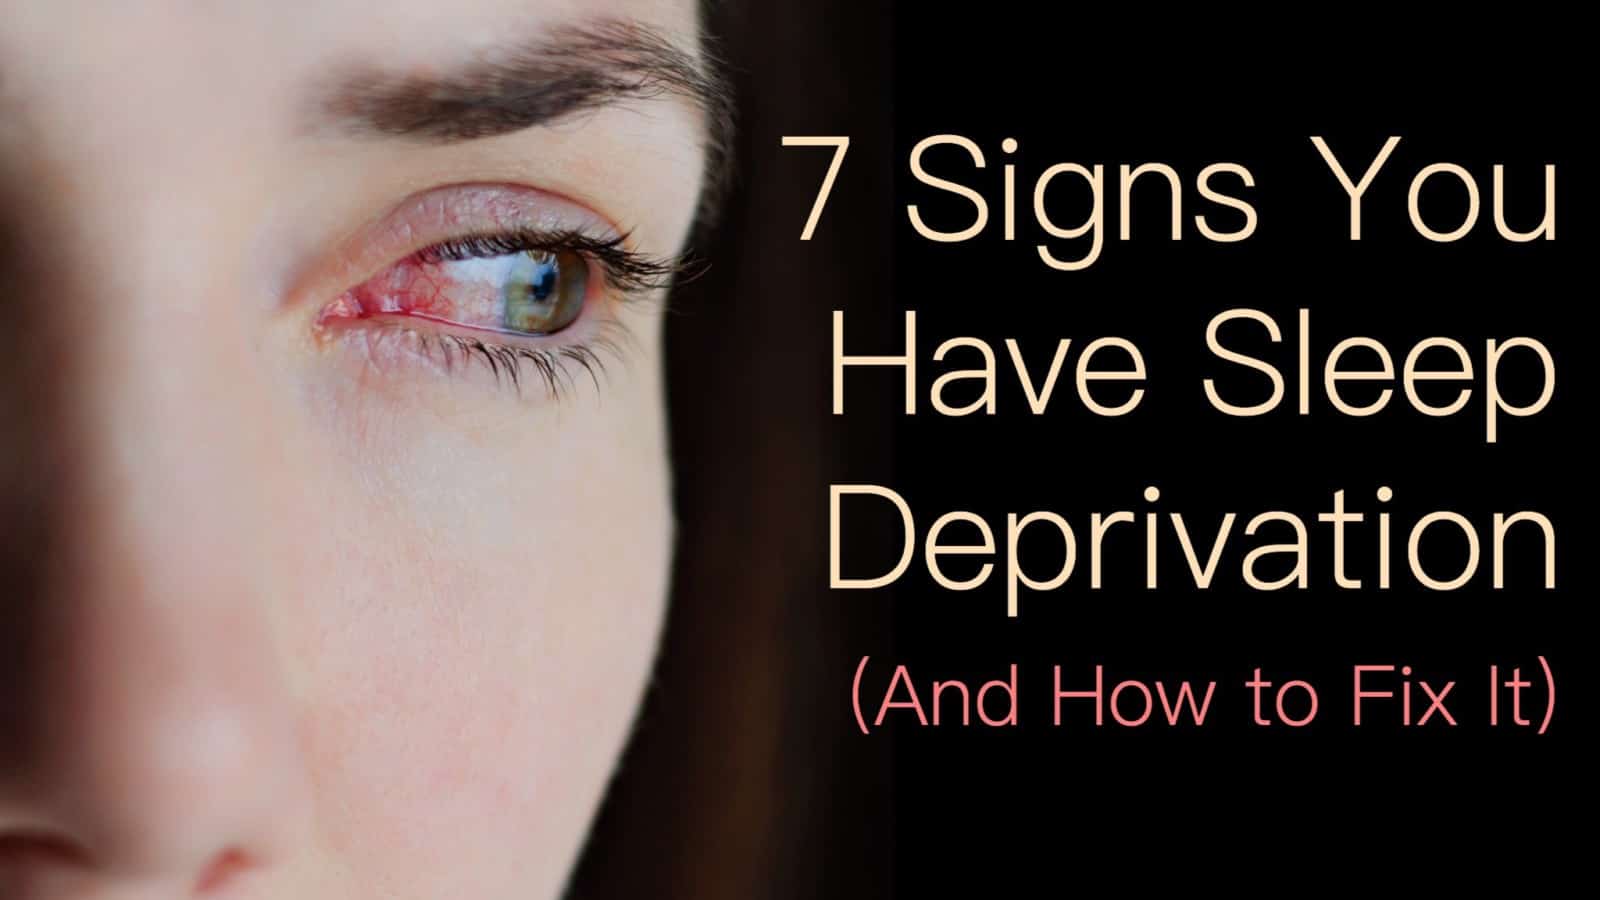 7 Signs You Have Sleep Deprivation (And How to Fix It)